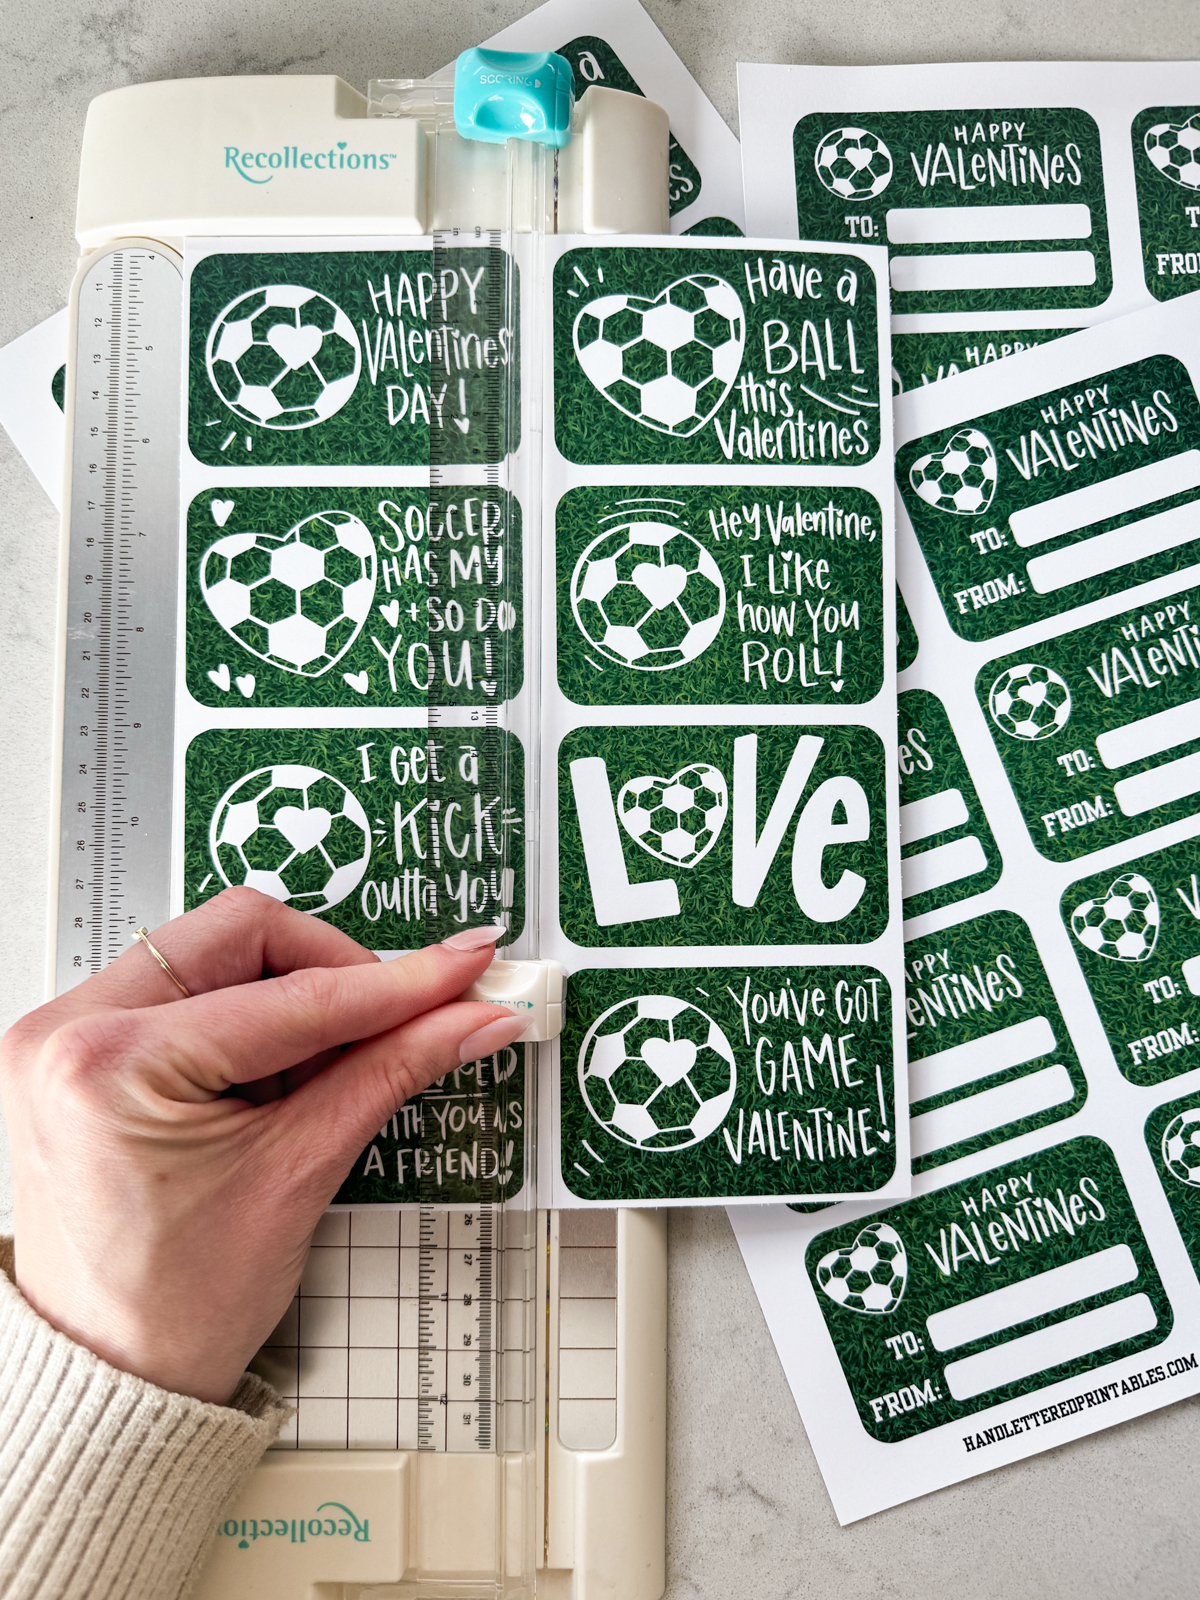 image shows soccer themed valentines printed in full sheets, using a small paper cutter to cut to size valentines have a heart shaped soccer ball and a soccer ball with a heart on it and a grass background. valentines puns and sentiments include: happy valentines day, have a ball this valentines, hey valentine i like how you roll, soccer has my heart and so do you, i get a kick outta you, love (with a heart soccerball as the o), you've got game valentine, and i really scored with you as a friend reverse reads 'happy valentines' with room for to and from names. soccer/ american football